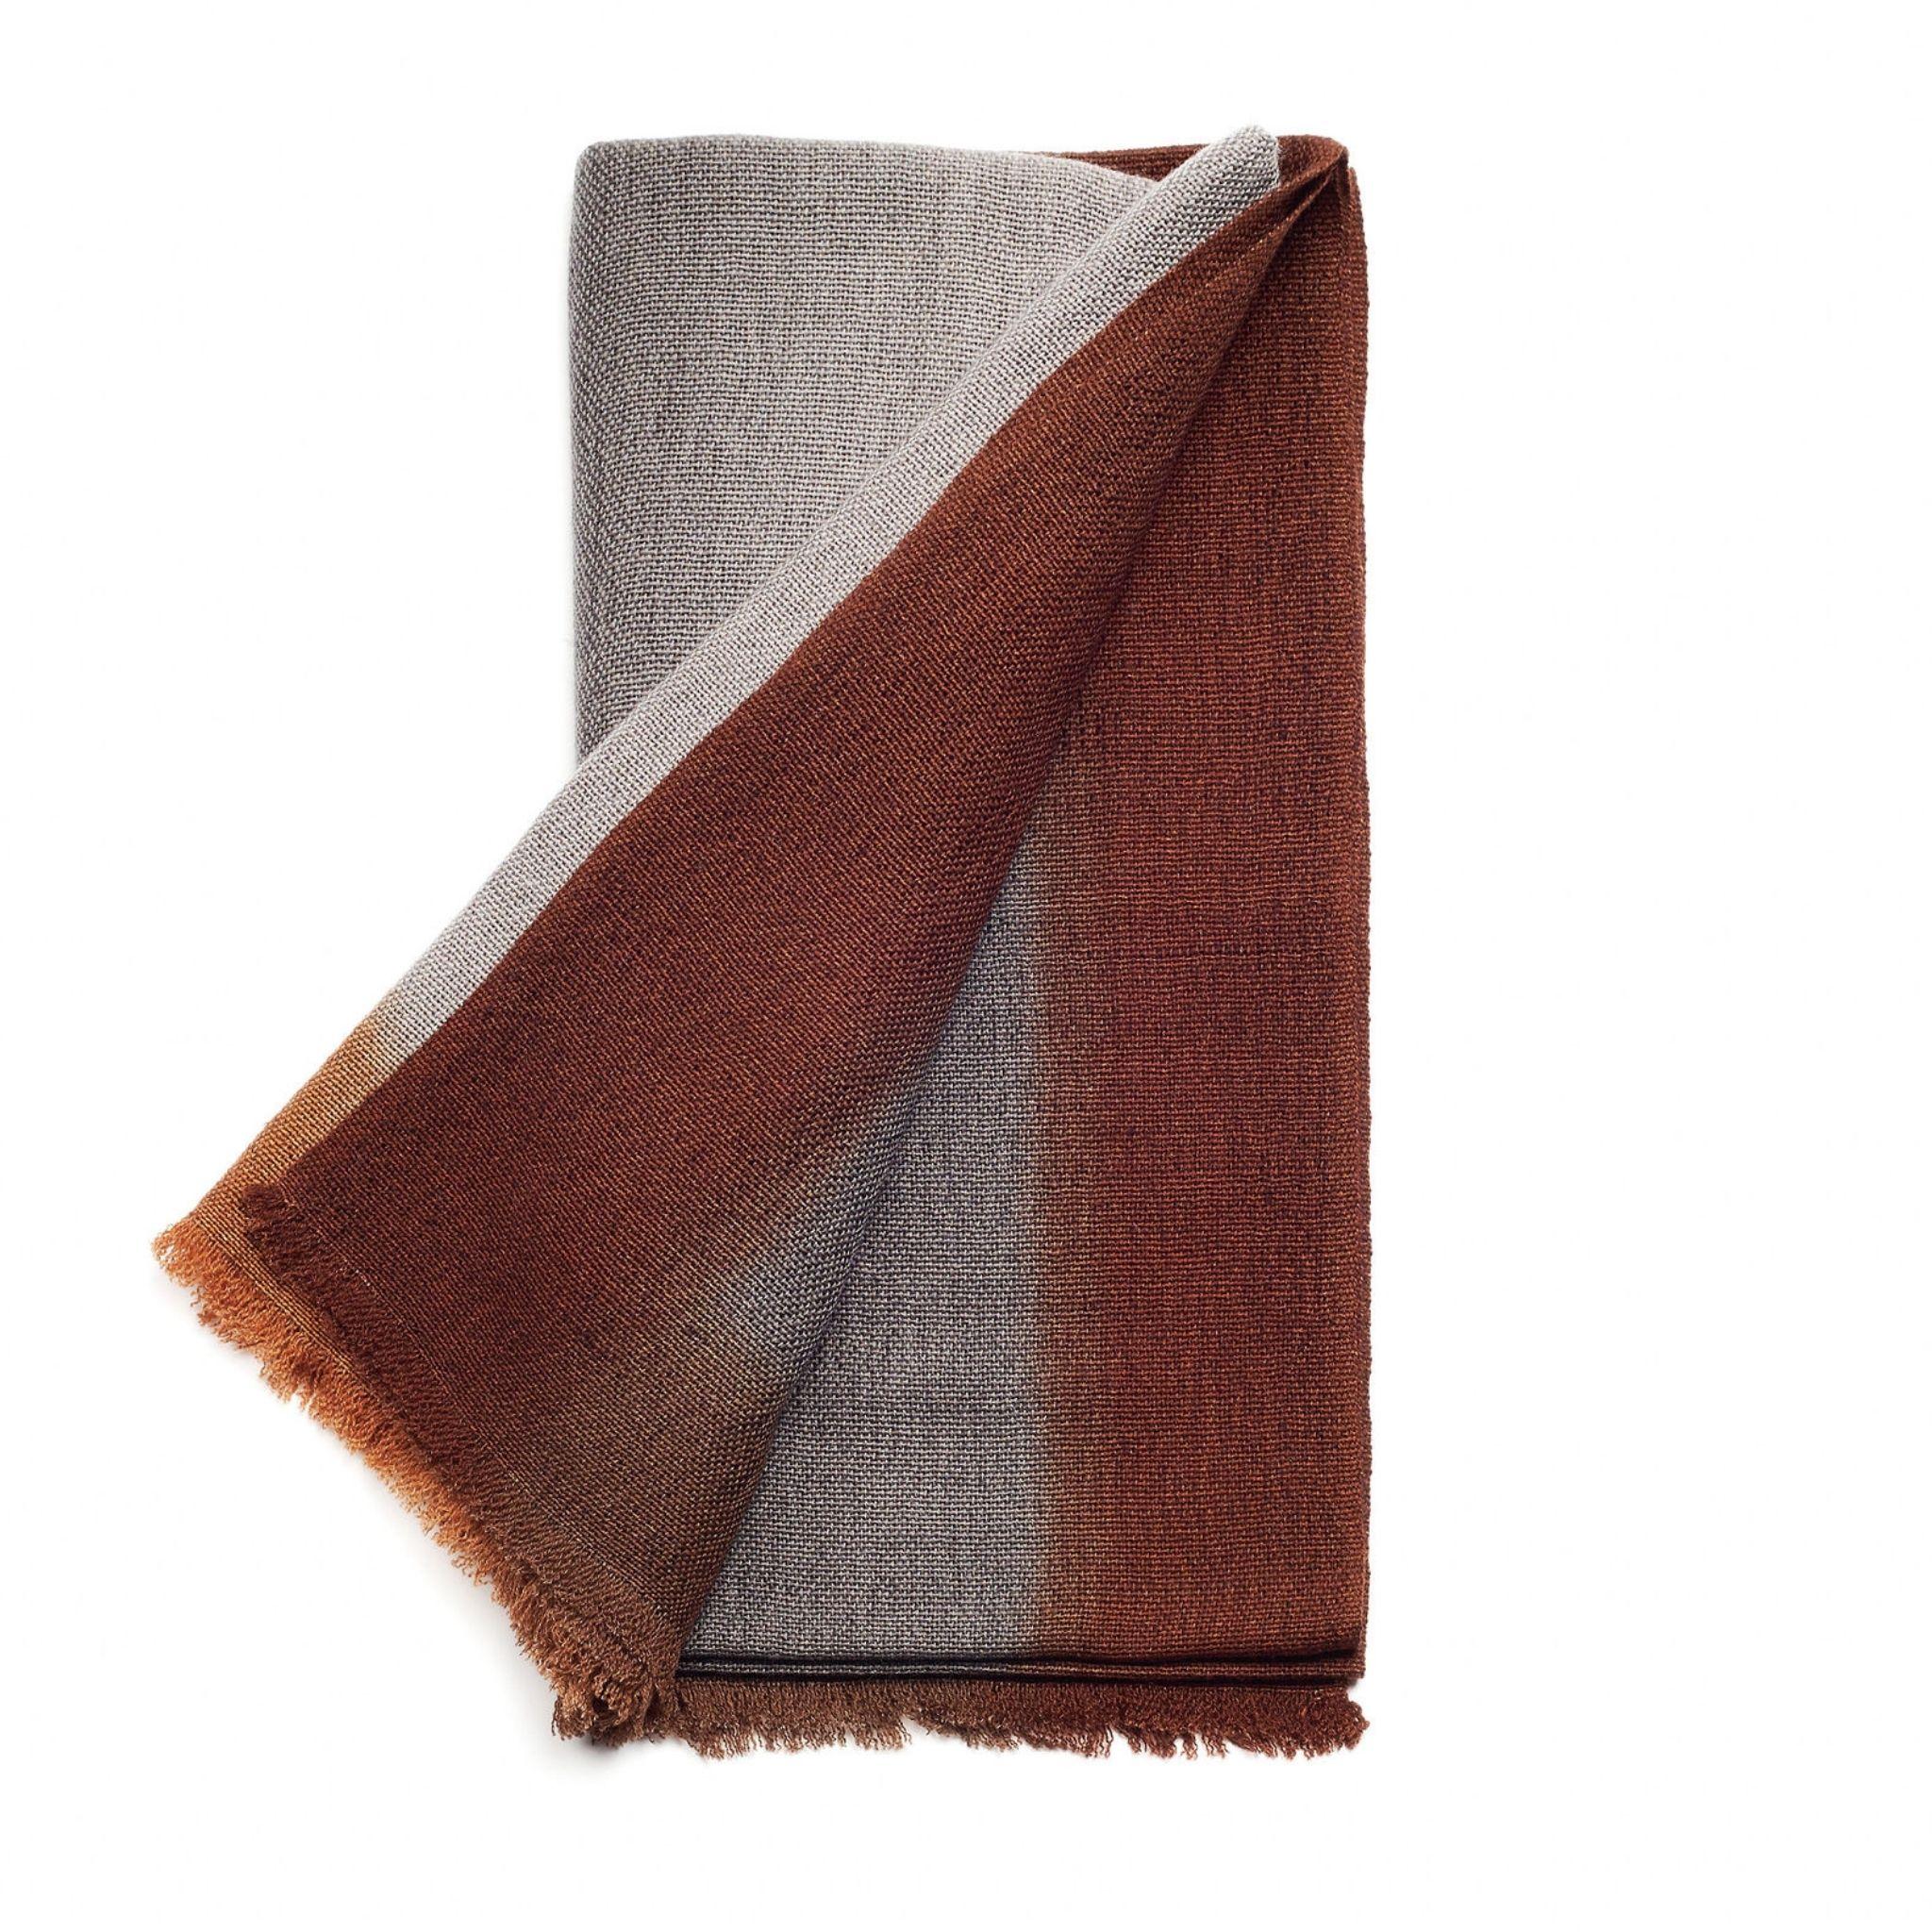 Simply Taupe handloom merino  throw / blanket is handwoven by master weavers in Nepal and dip dyed entirely with certified Eco-friendly Swiss Dyes.

Each piece is individually dip dyed entirely using earth-friendly dyes. The design is comprised of